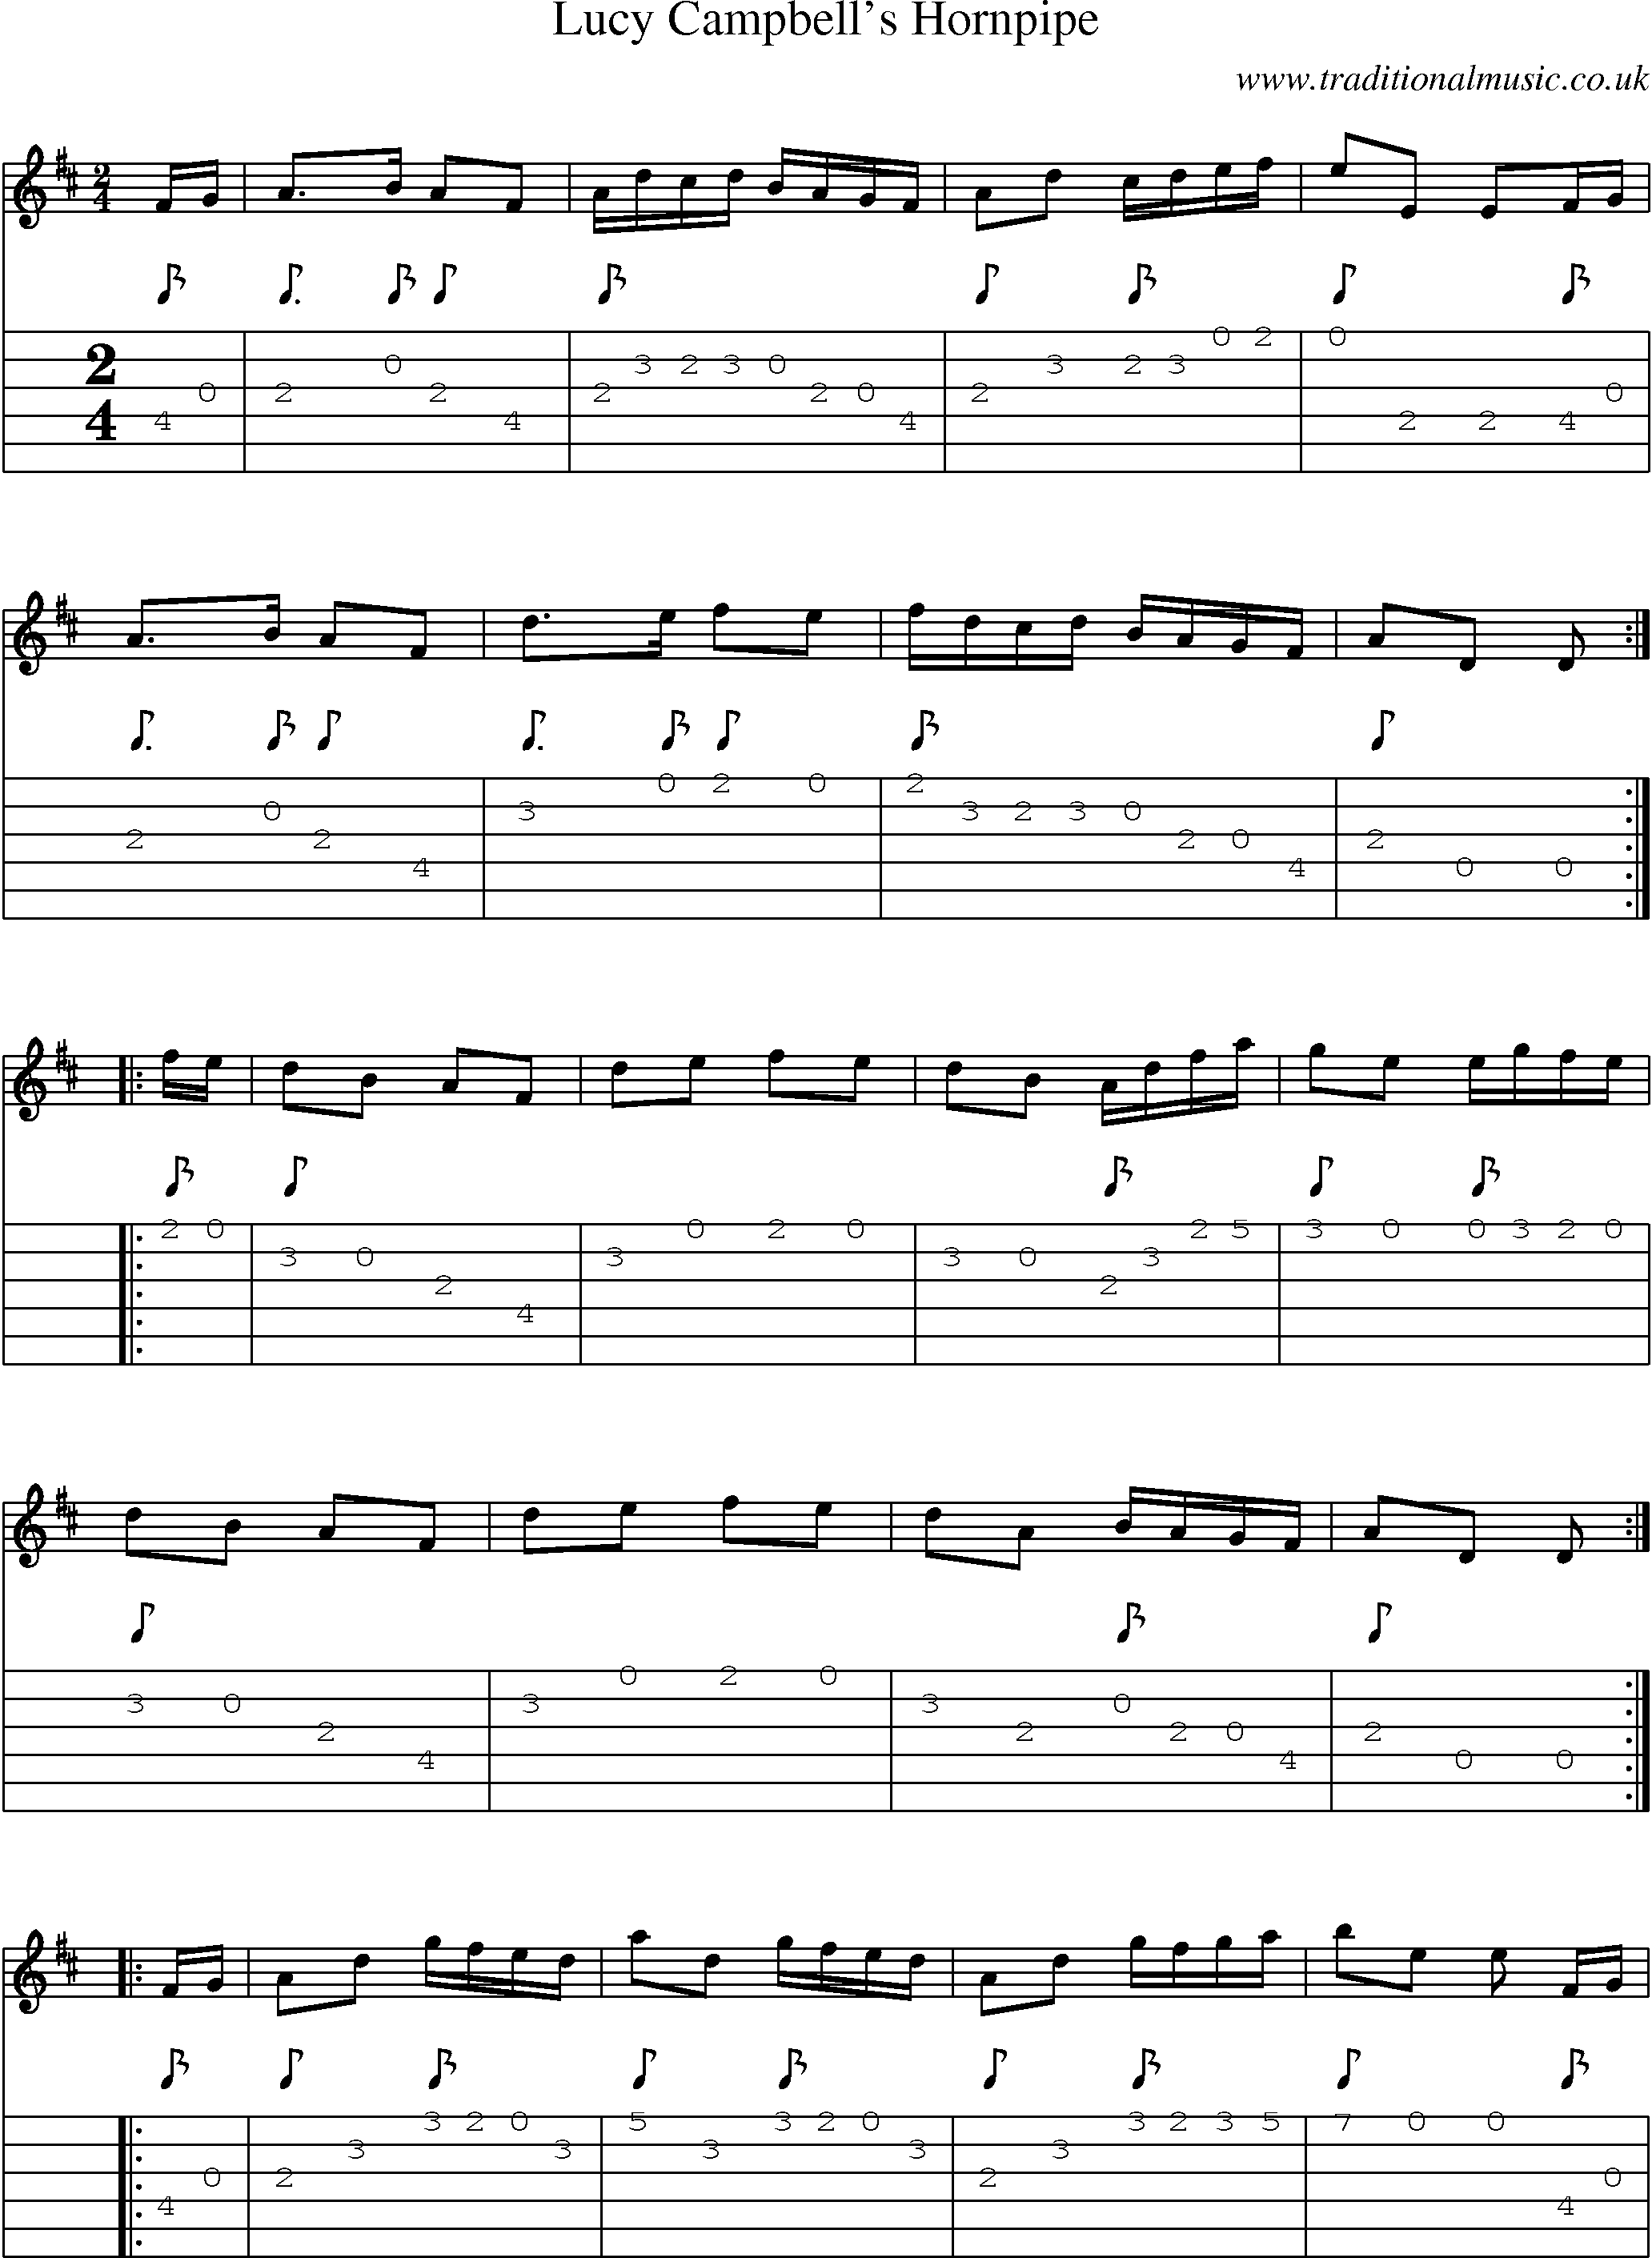 Music Score and Guitar Tabs for Lucy Campbells Hornpipe